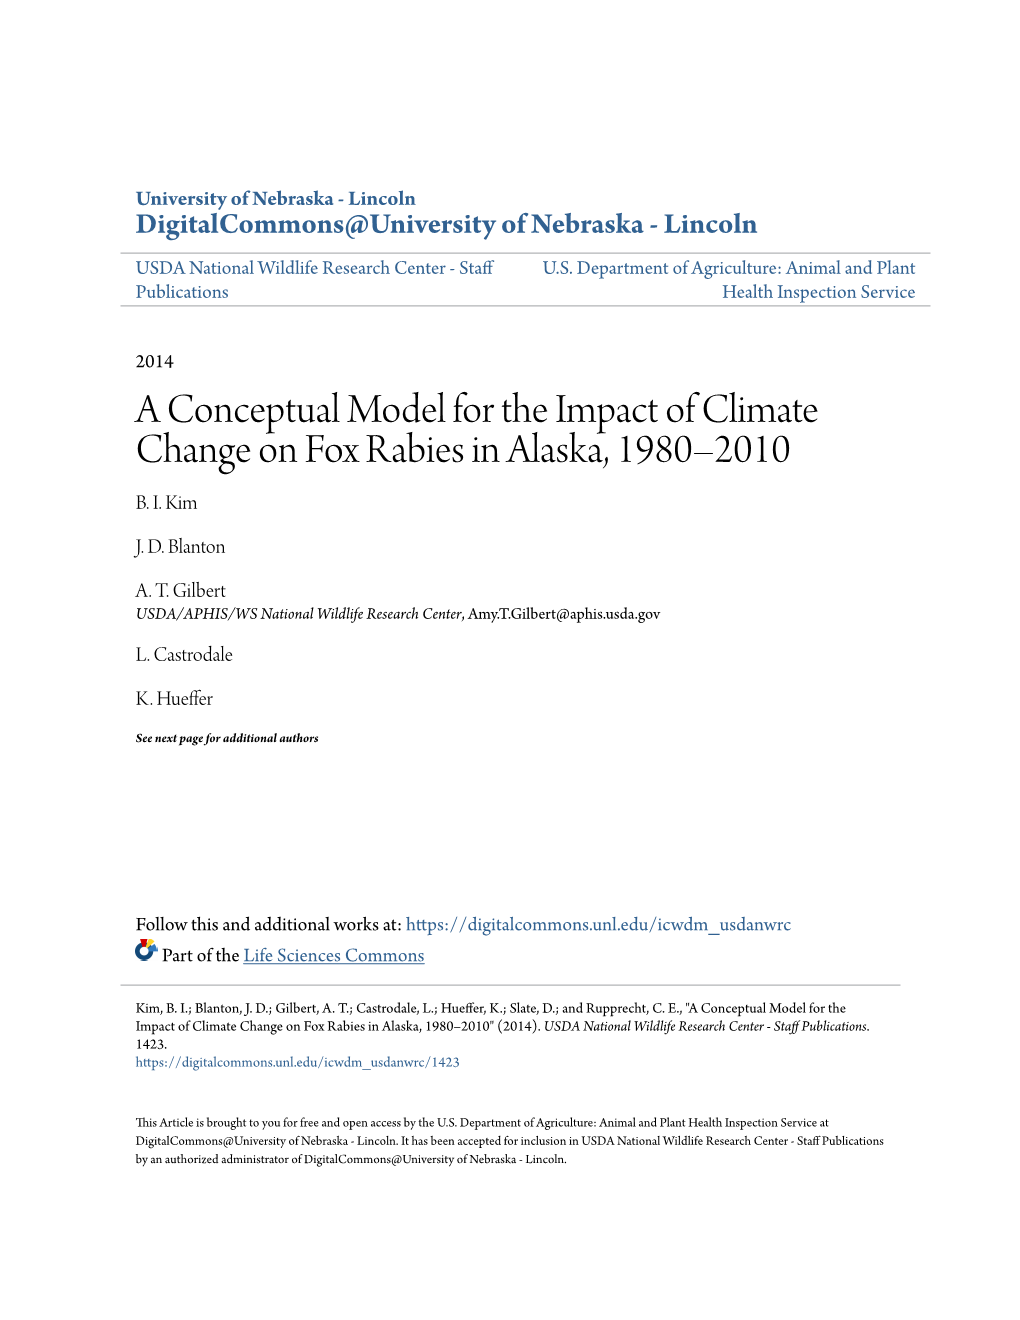 A Conceptual Model for the Impact of Climate Change on Fox Rabies in Alaska, 1980–2010 B